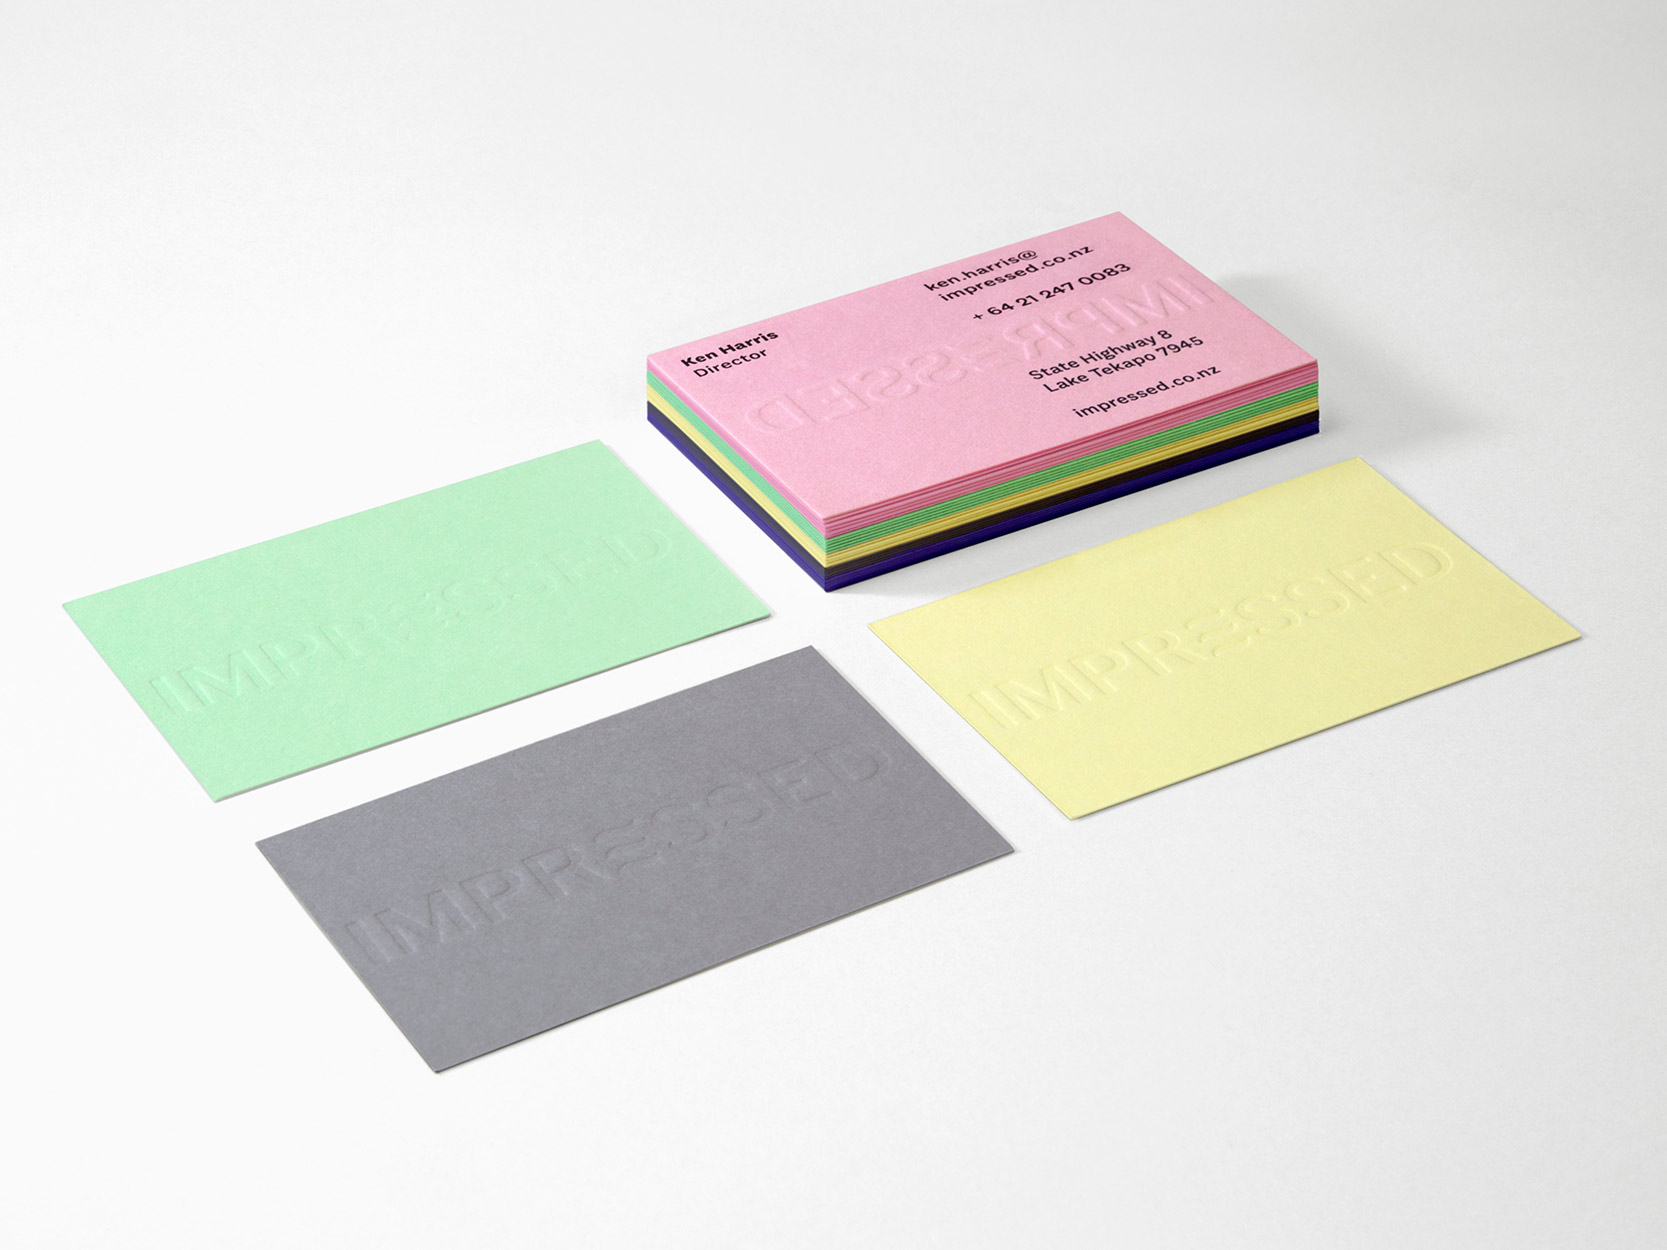 Impressed embossed business cards in the brands colours